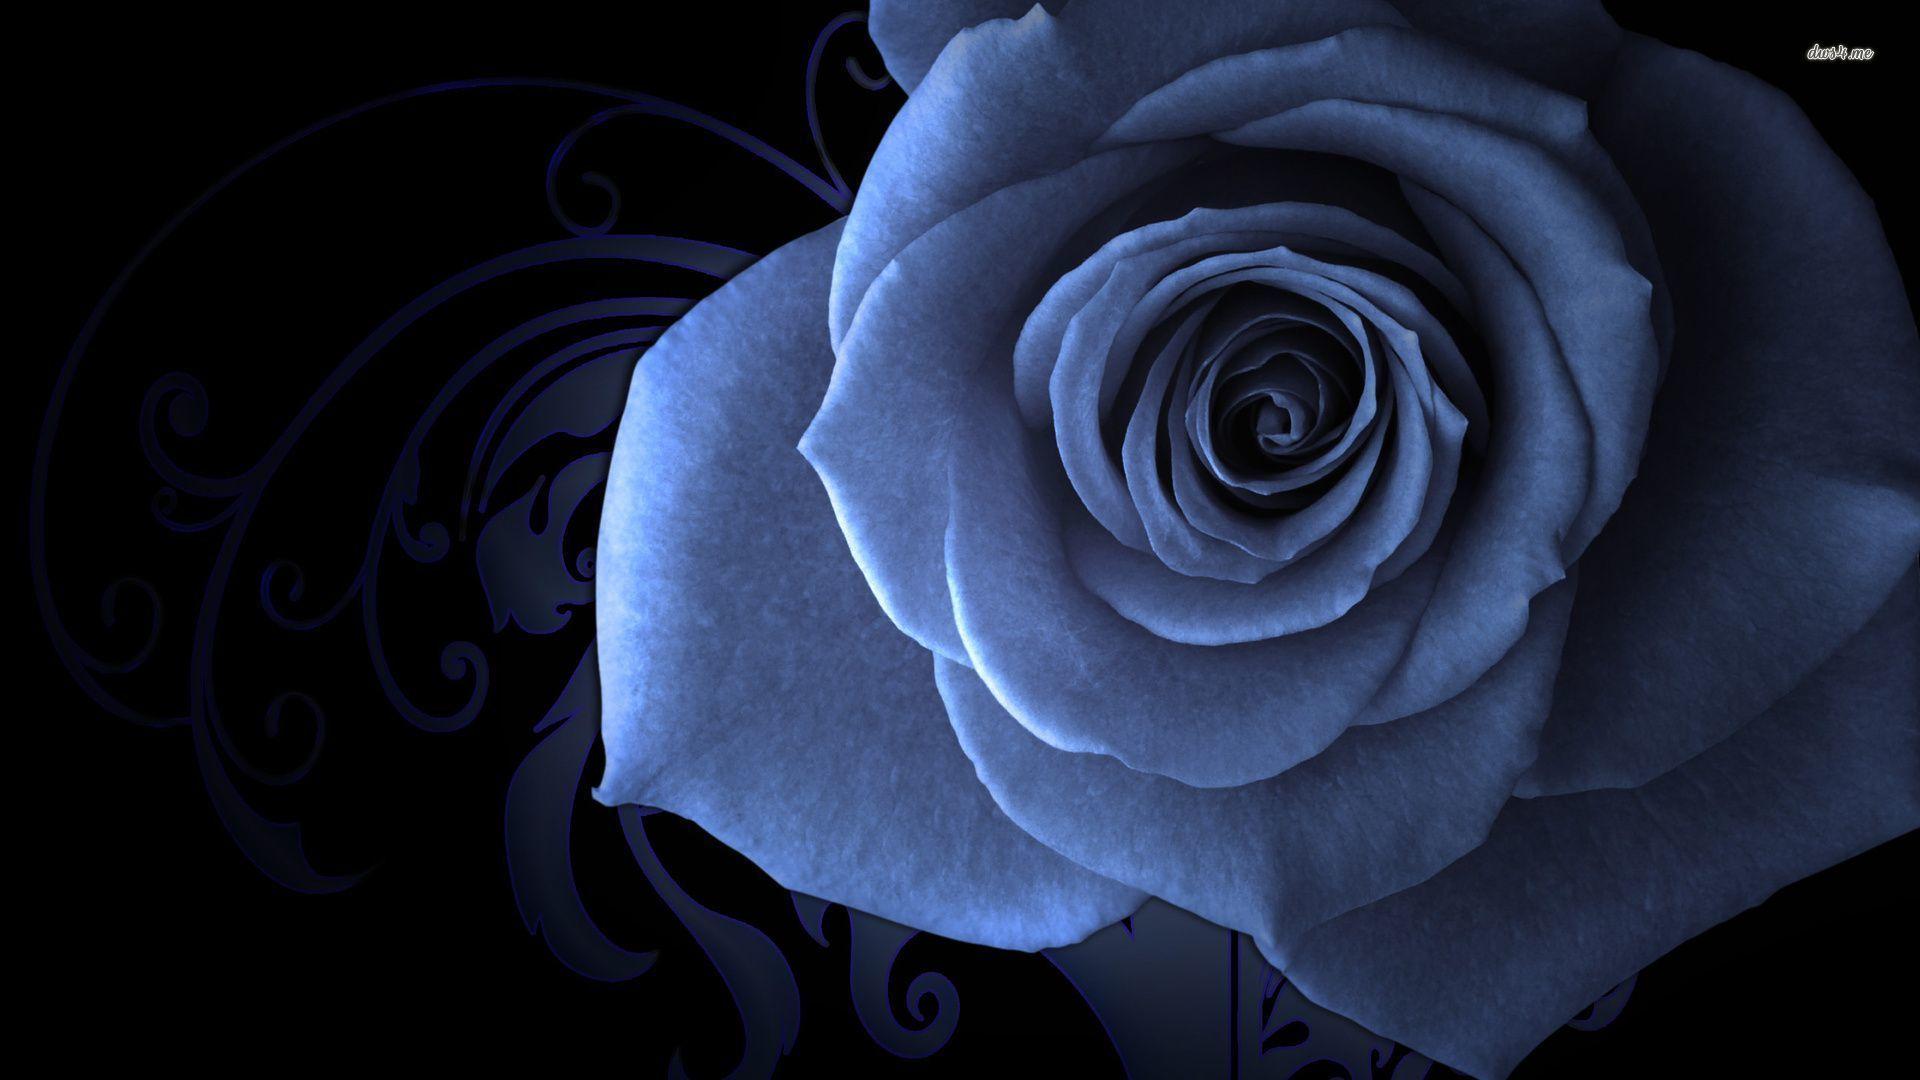 Black and Blue Rose Wallpapers - Top Free Black and Blue Rose